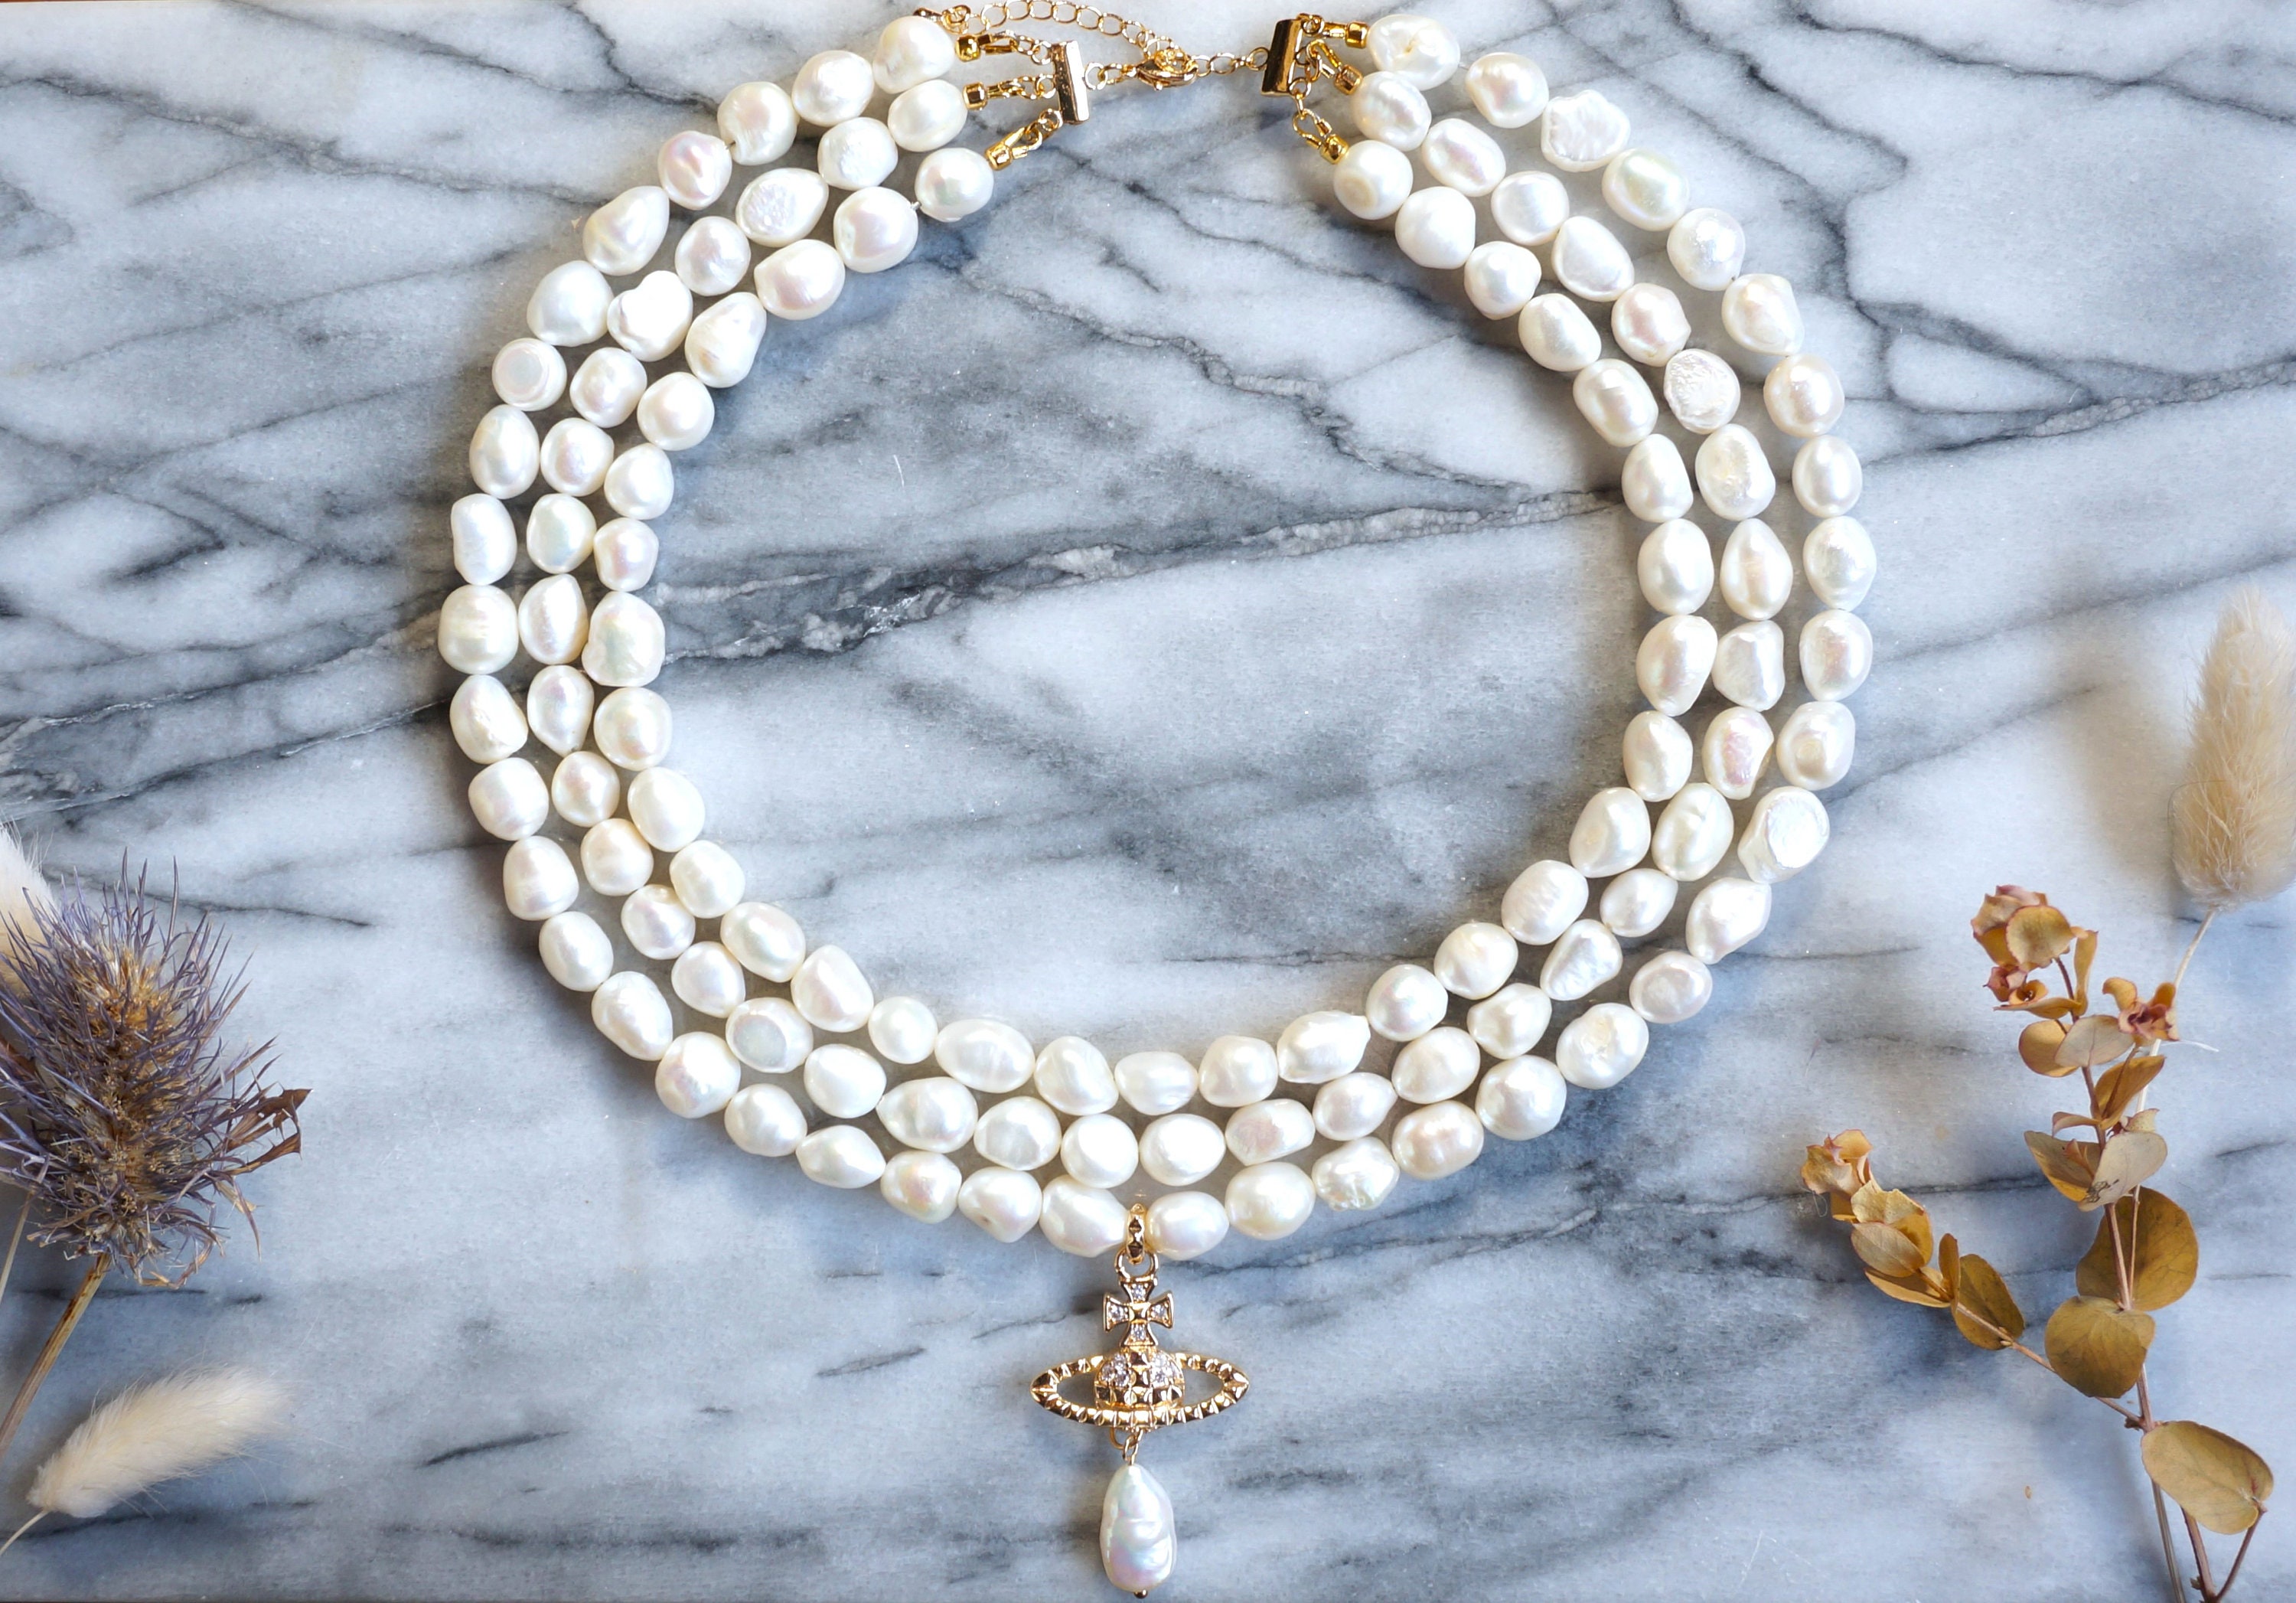 Off Round White Pearls Necklace 14K Gold Clasp 18 Hand Knotted Strand -  Ruby Lane